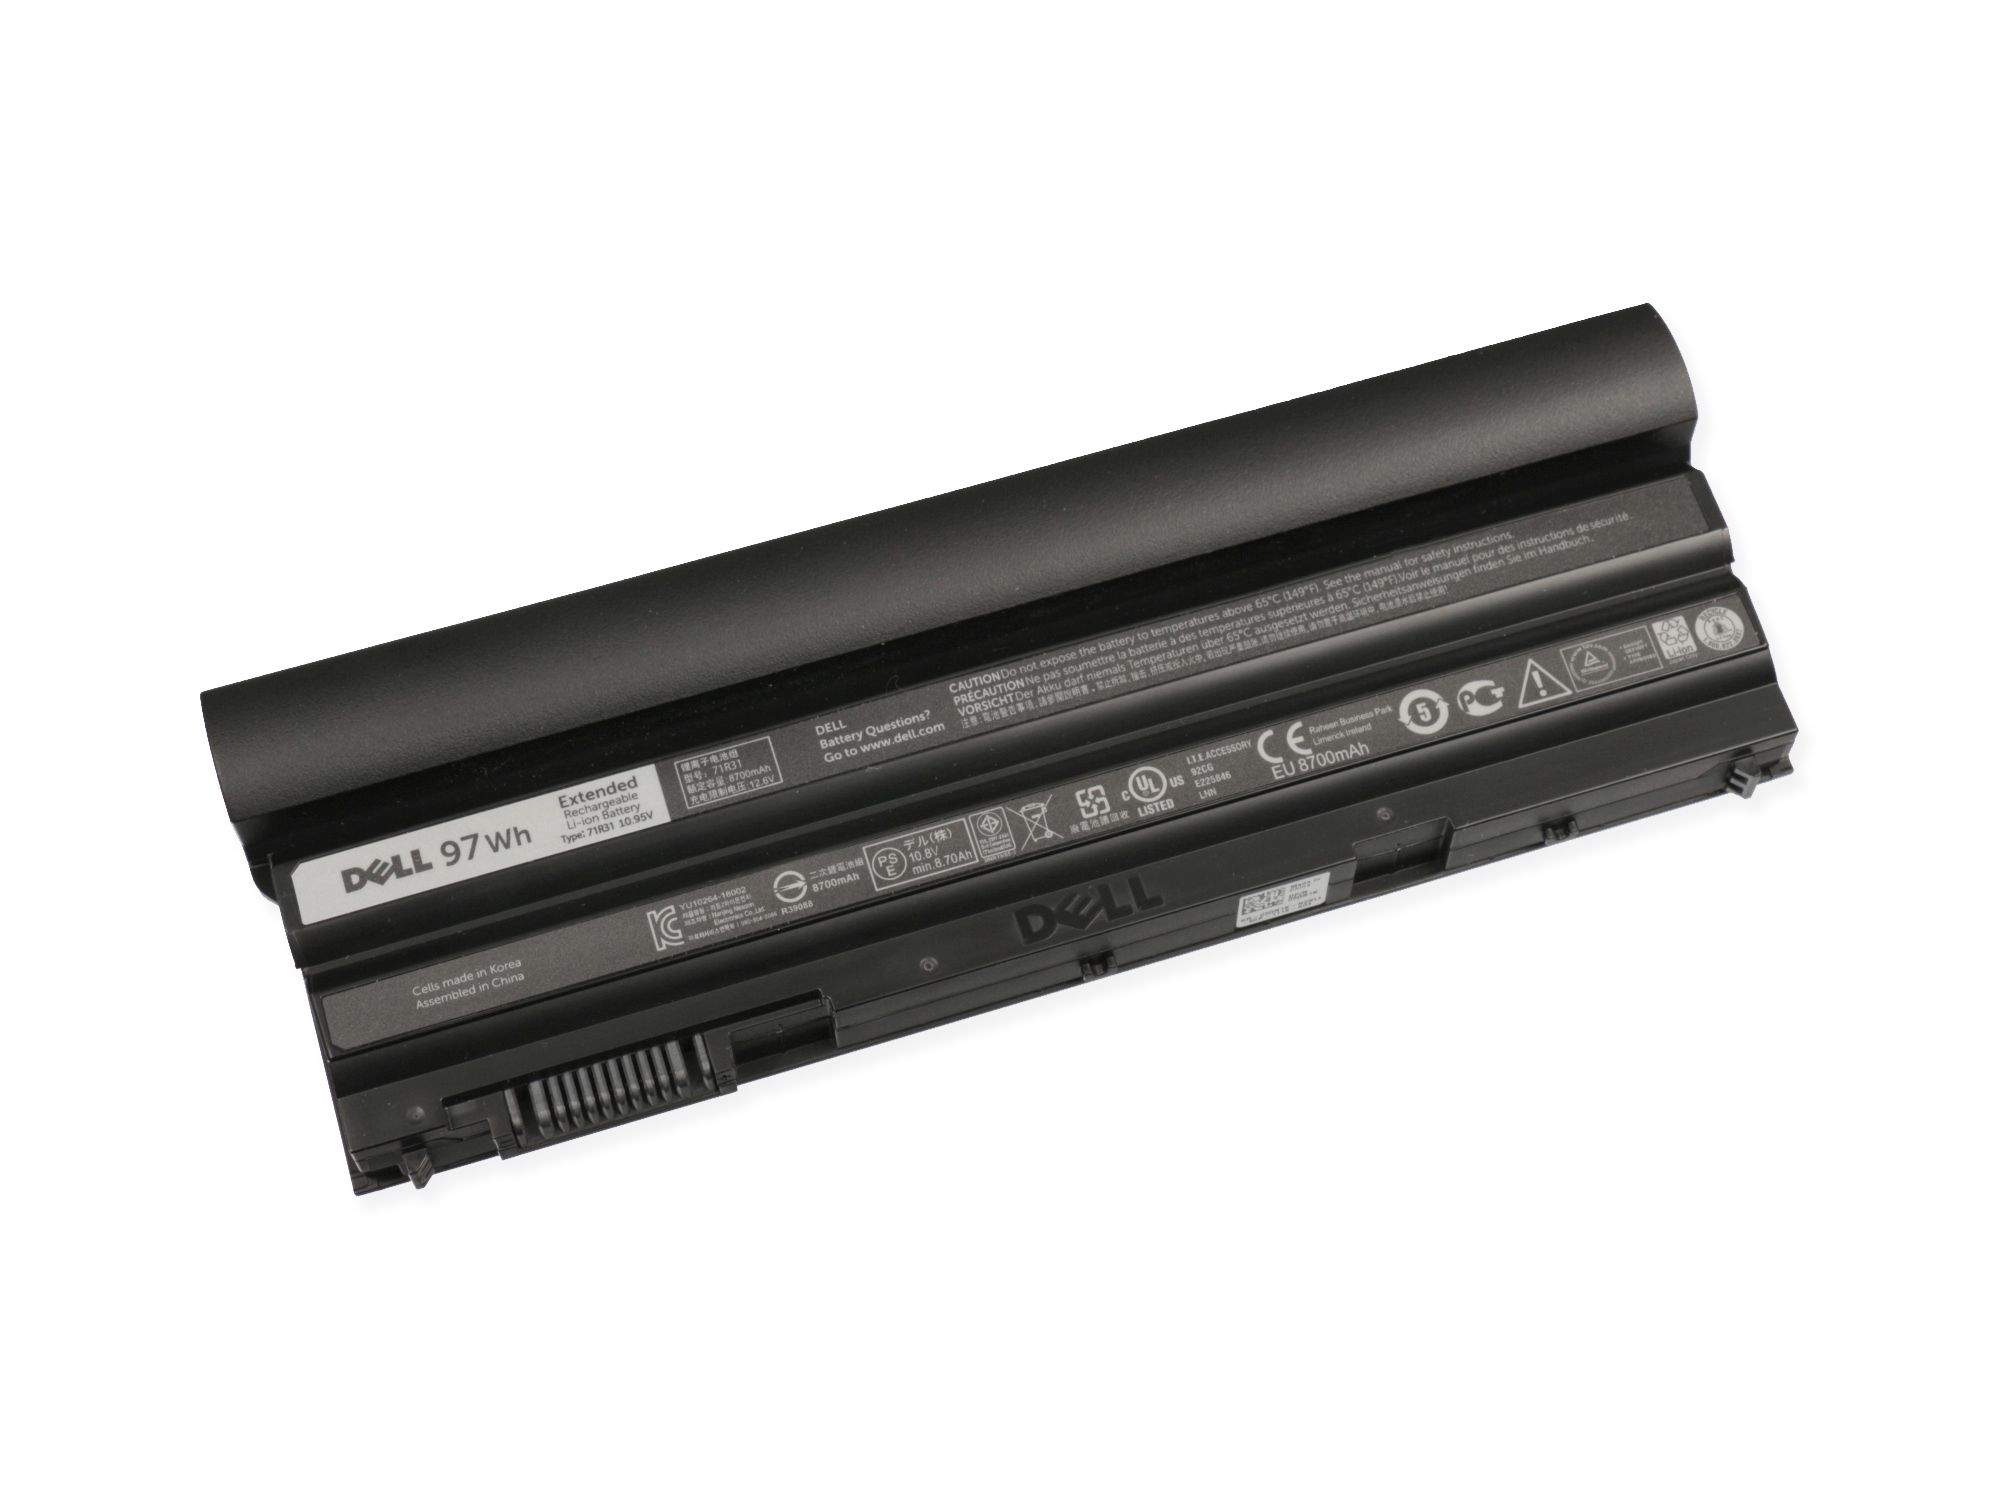 DELL Battery 9 Cell 97WhR